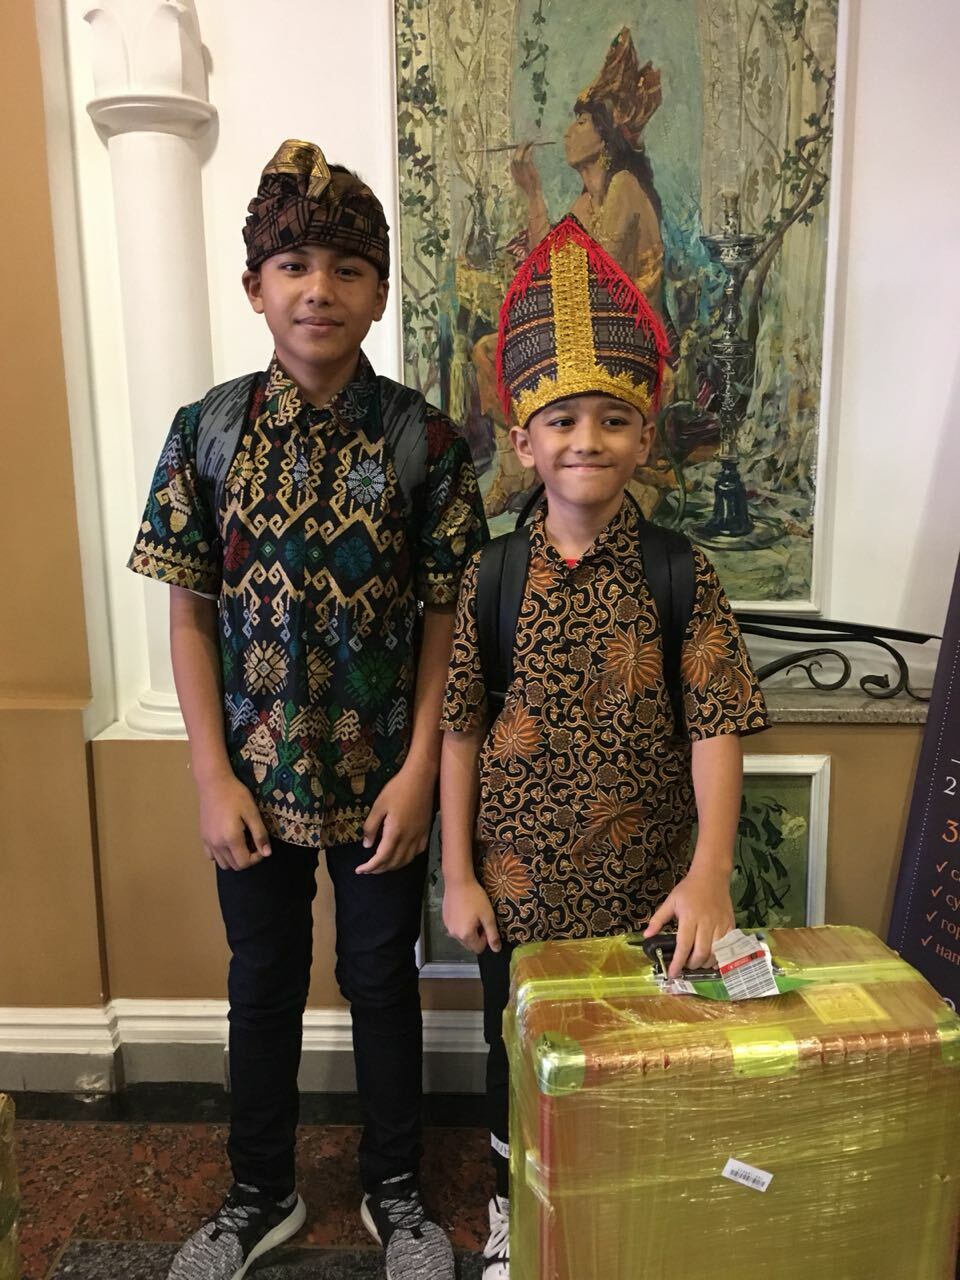 Muhammad Raffa Yasin and Alfonso Hutabarat arrived in Moscow on Friday (08/06) to represent Indonesia at Football for Friendship, an international children's social program supported by Russian energy giant Gazprom and world football governing body FIFA. (Photo courtesy of Gazprom)